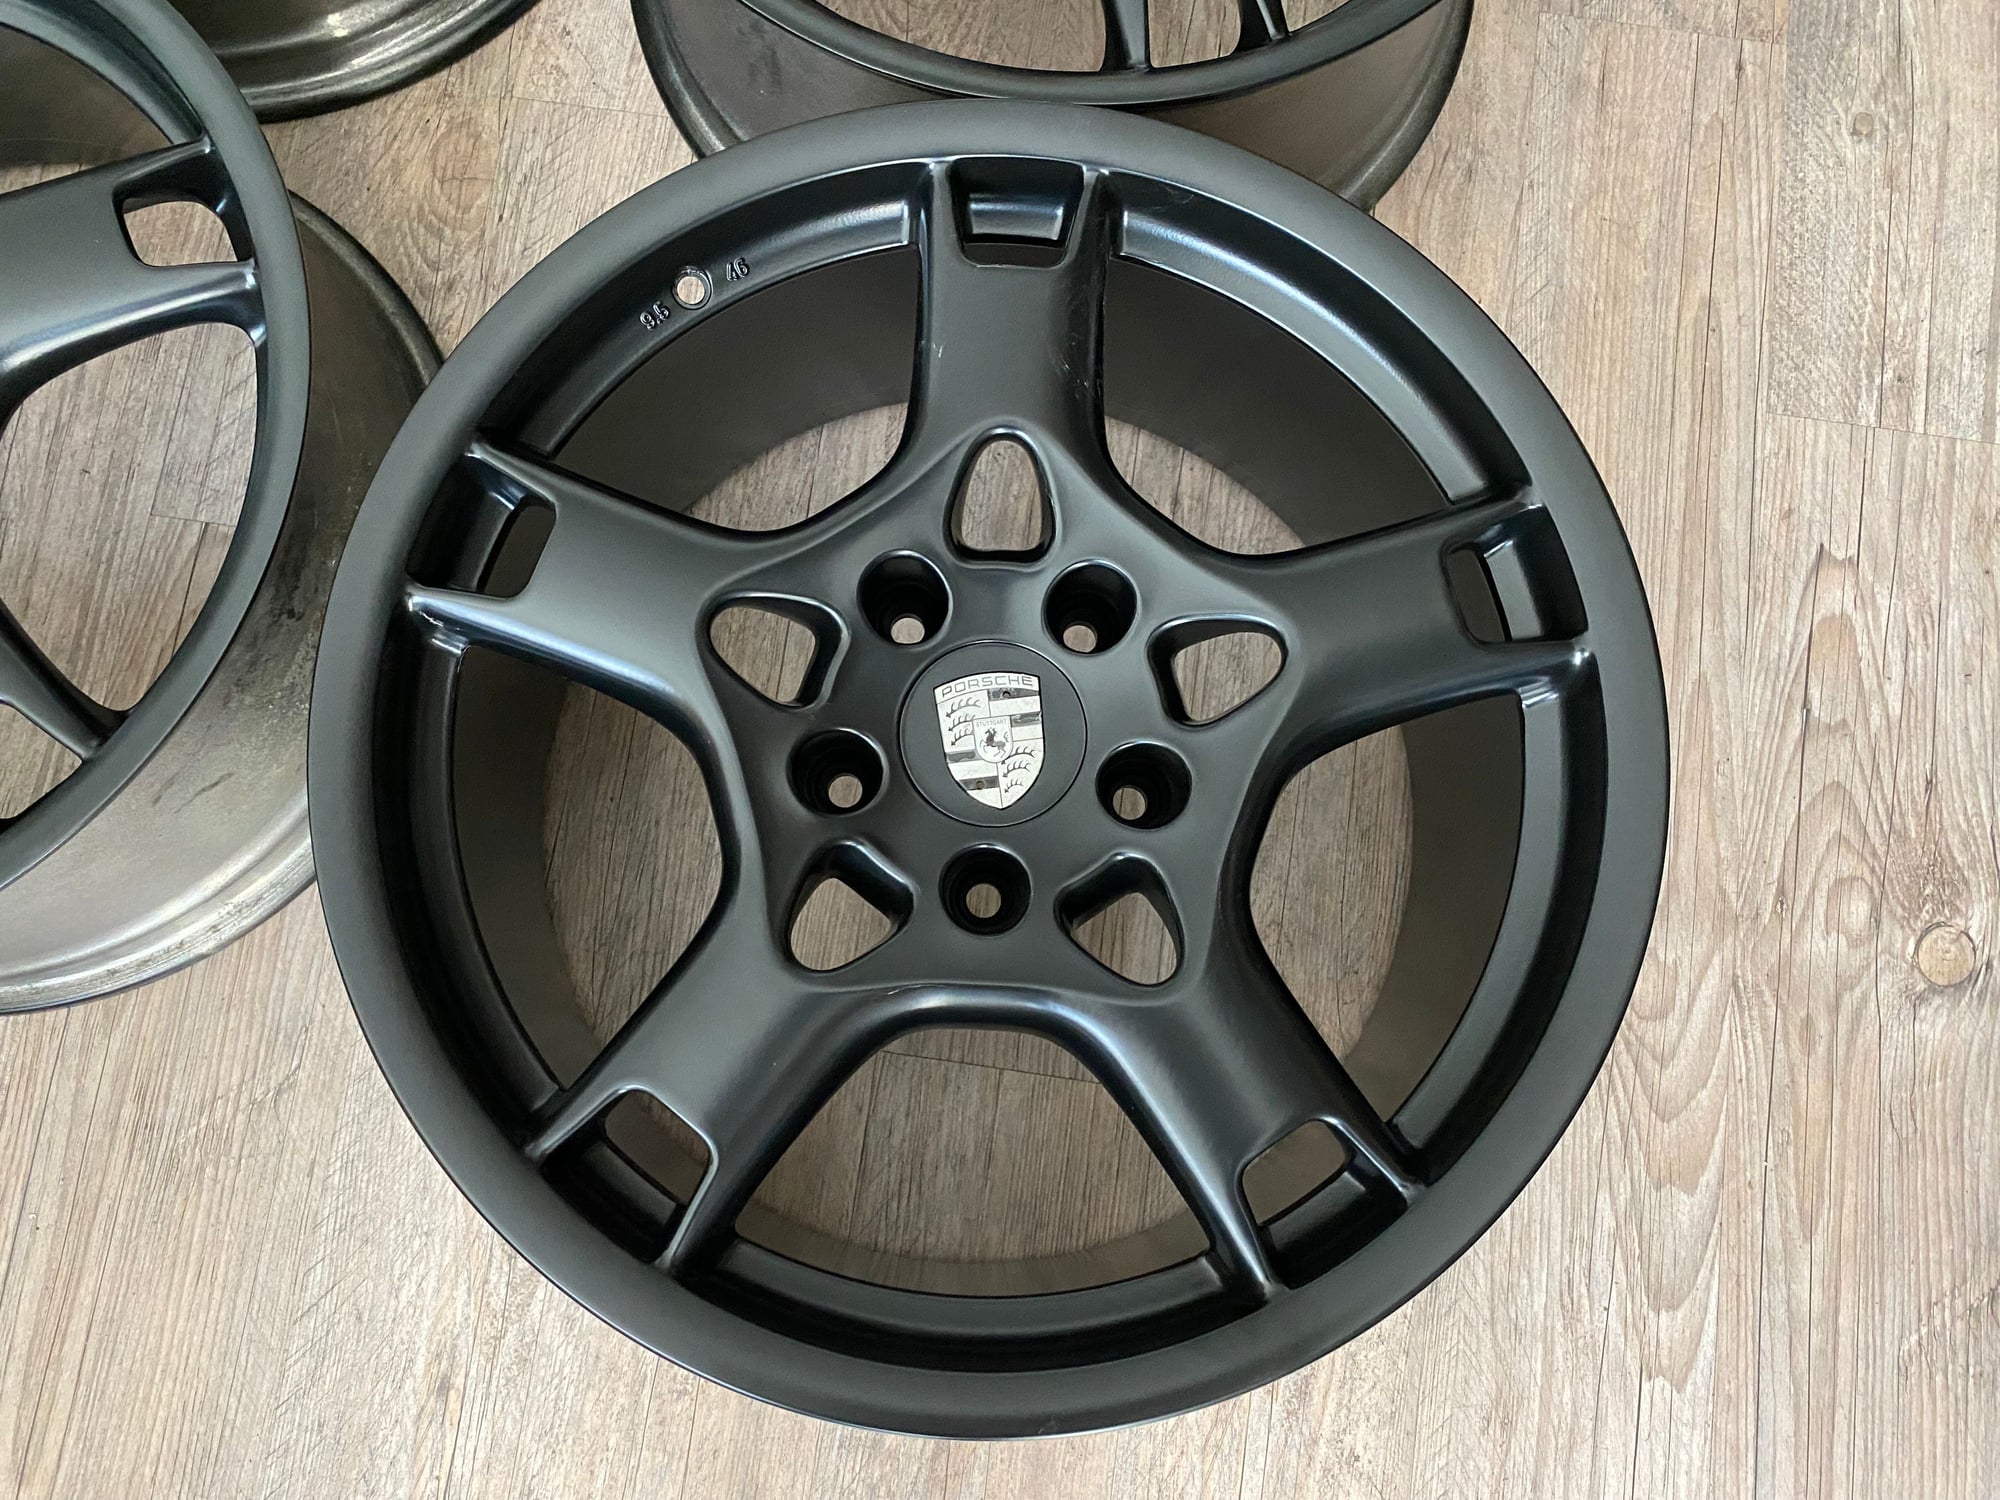 Wheels and Tires/Axles - Porsche 987/997 Black OEM Lobster Claw Wheels Set of 4 19" Satin Black - Used - Dallas, TX 75231, United States